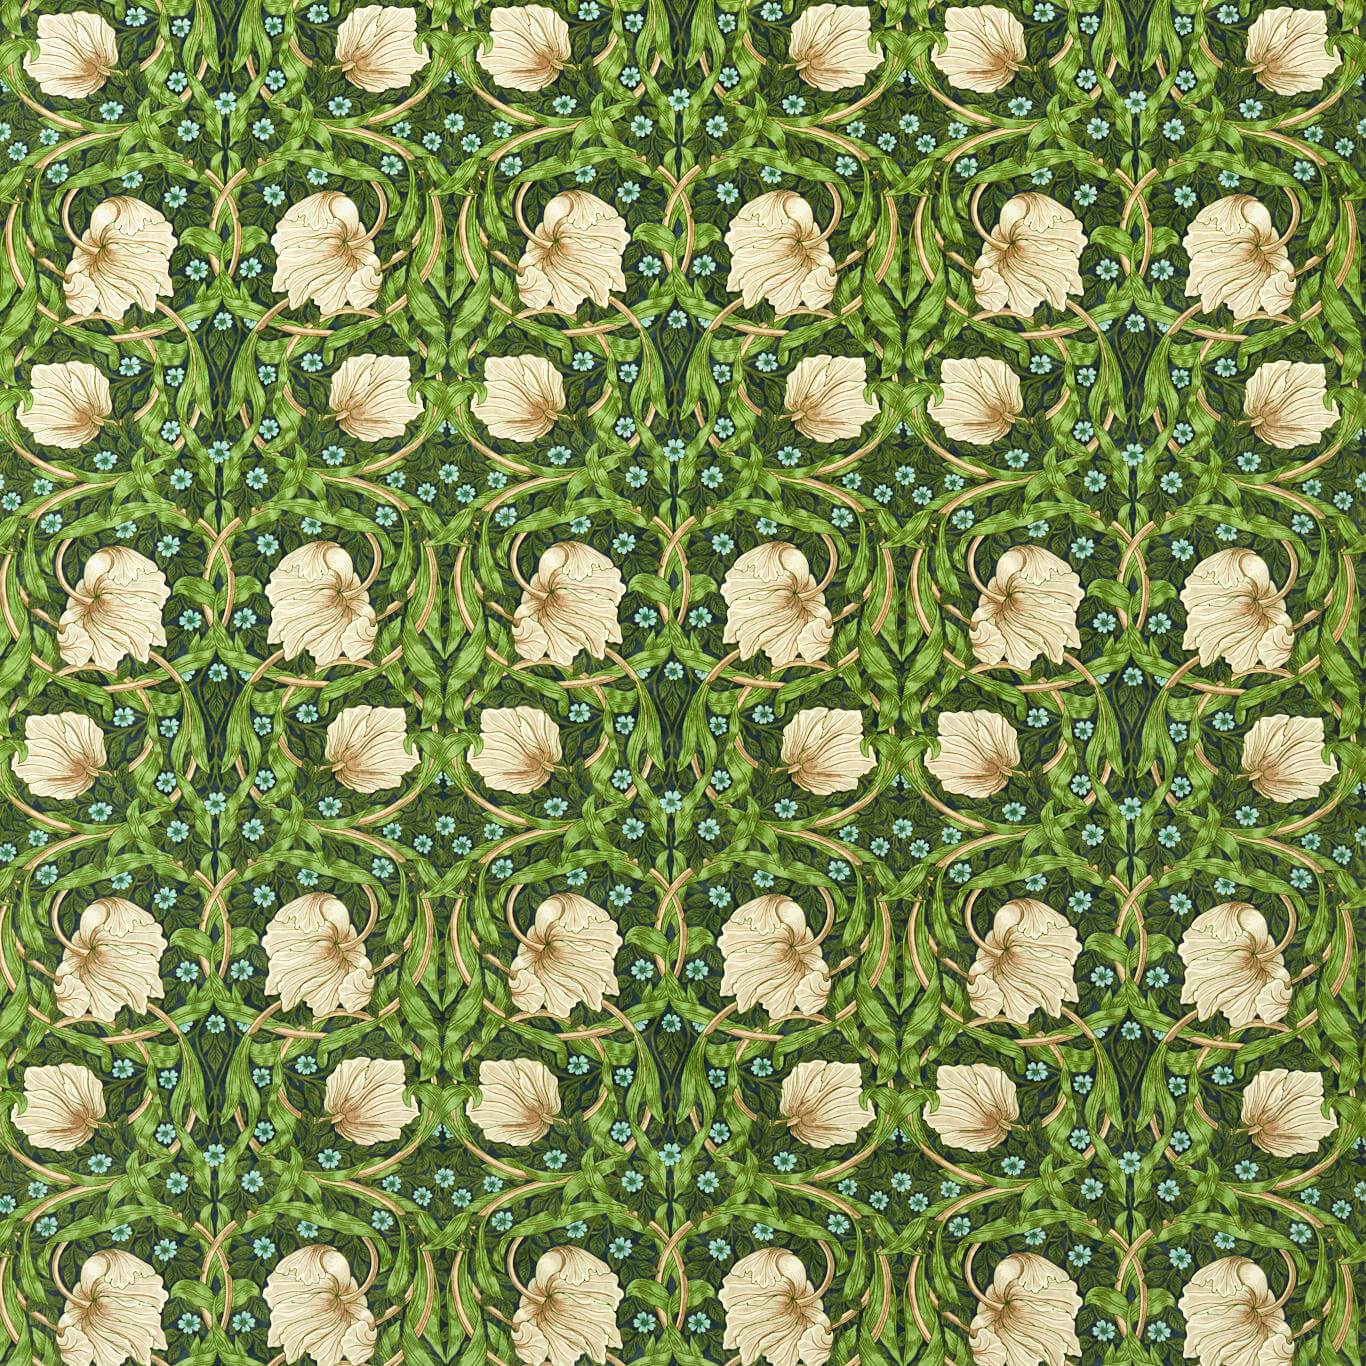 Pimpernel Midnight Fields Fabric By Morris & Co